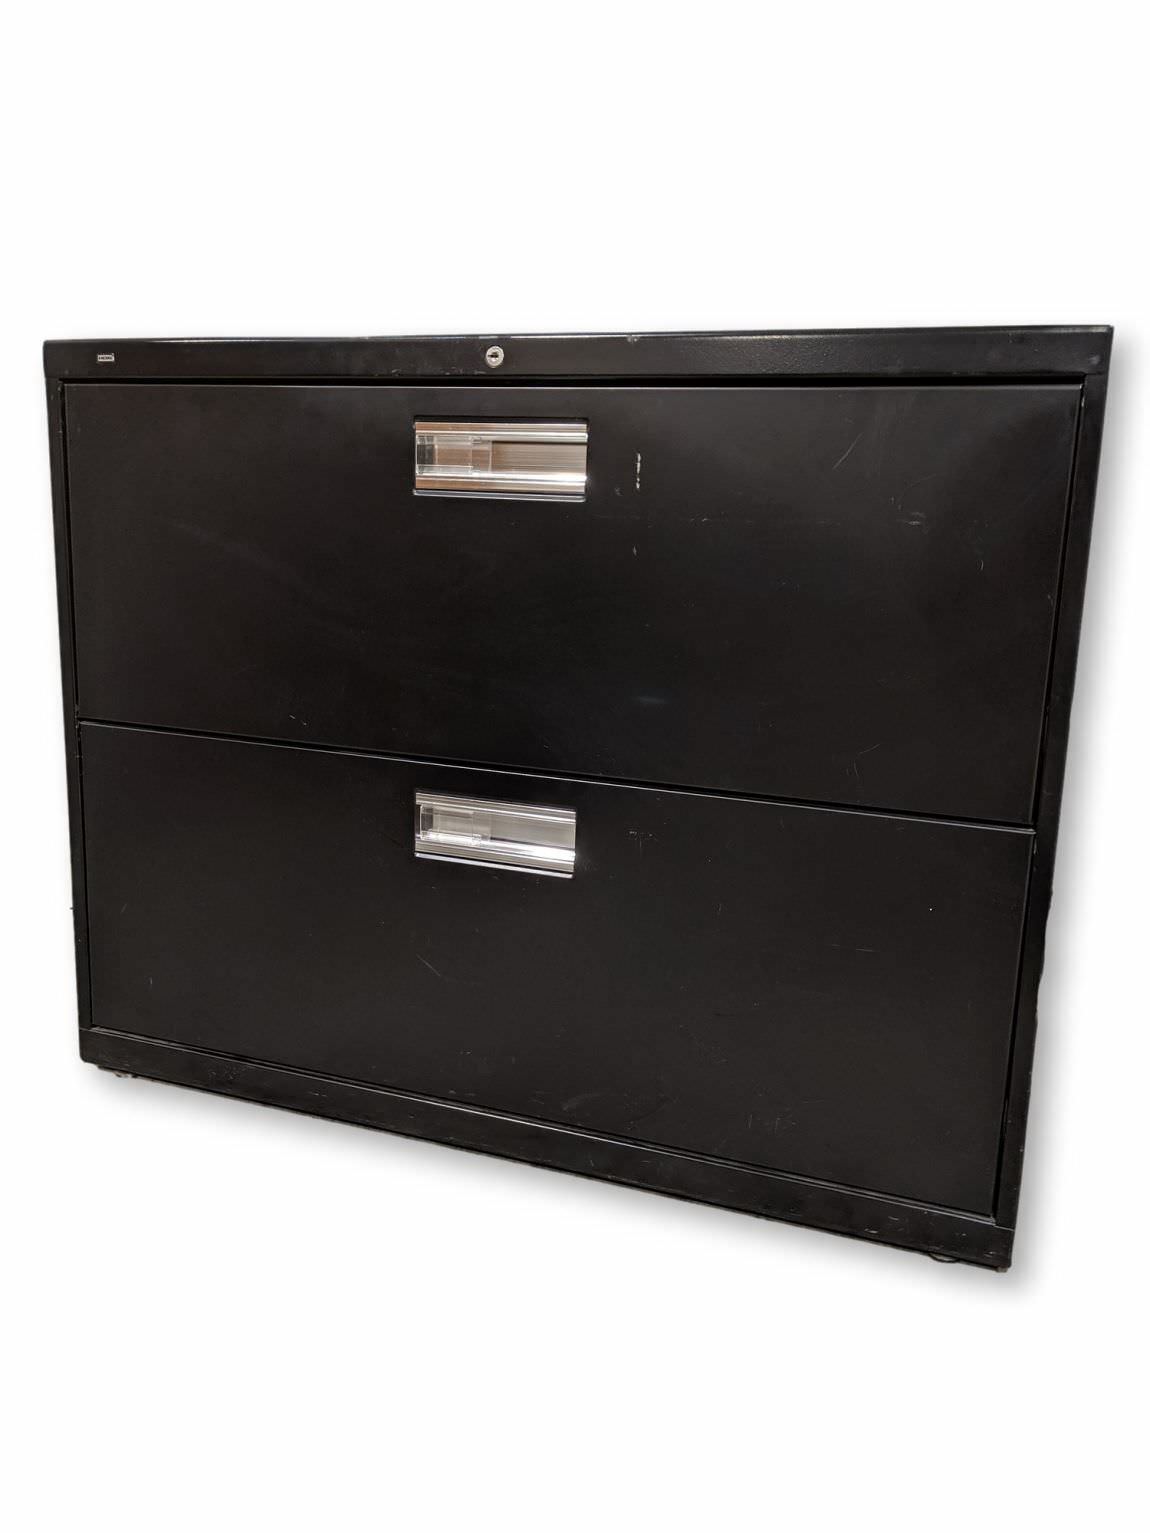 Black Hon 2 Drawer Lateral Filing Cabinet – 36 Inch Wide